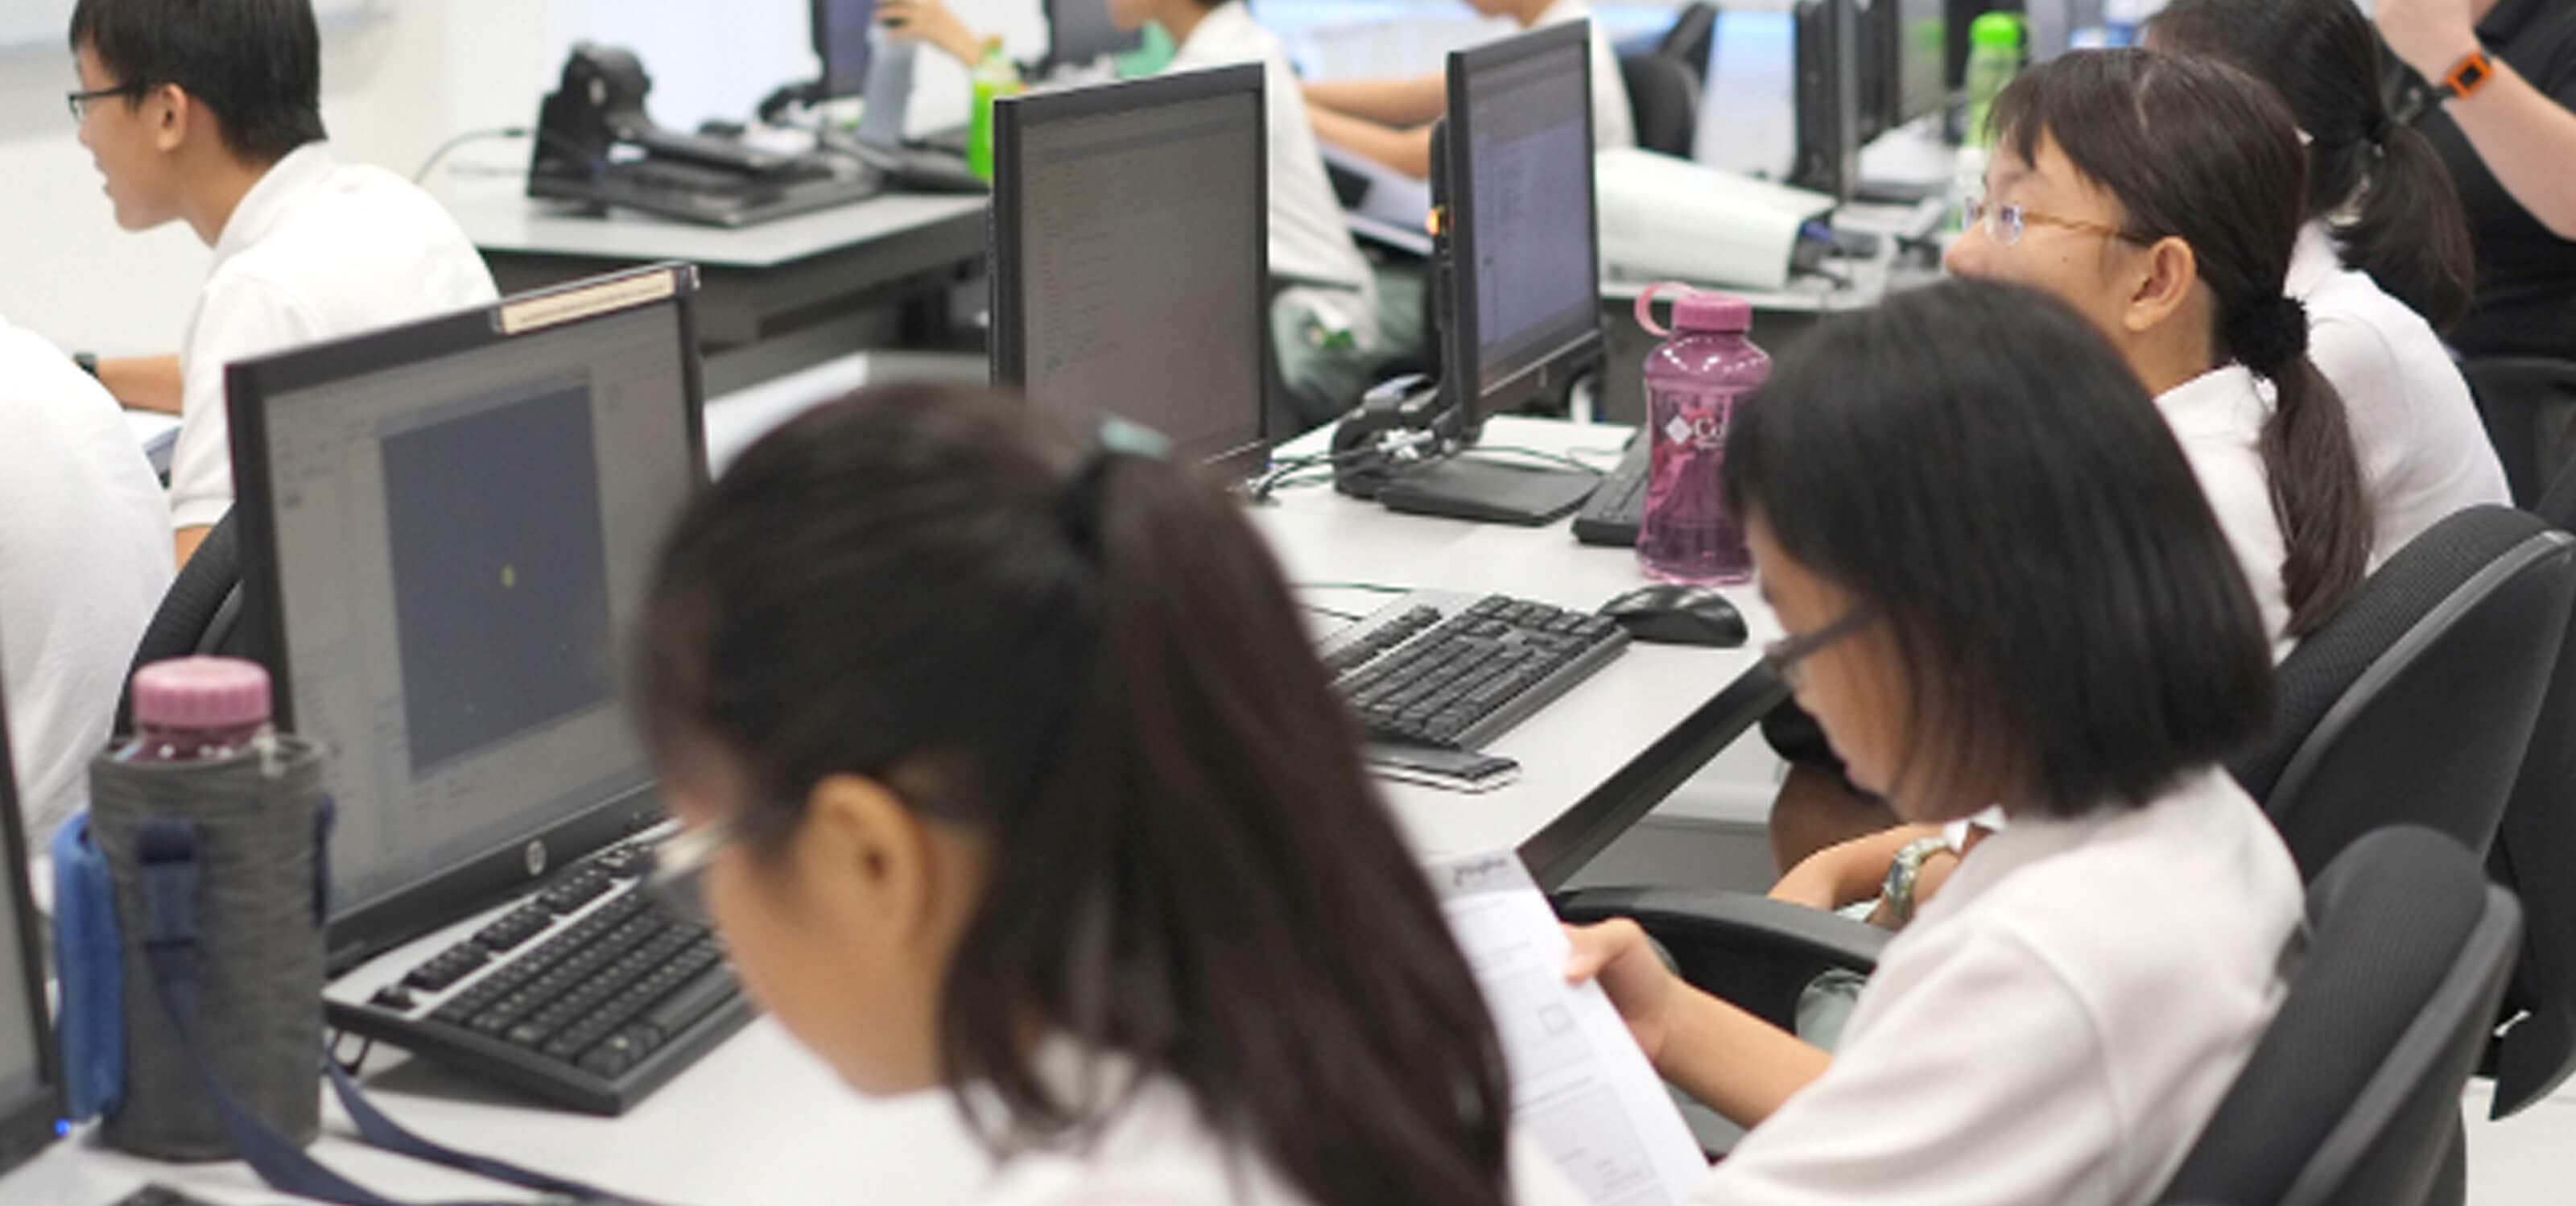 Students seen from over the shoulder, each sitting at a desk with a computer, working on different projects